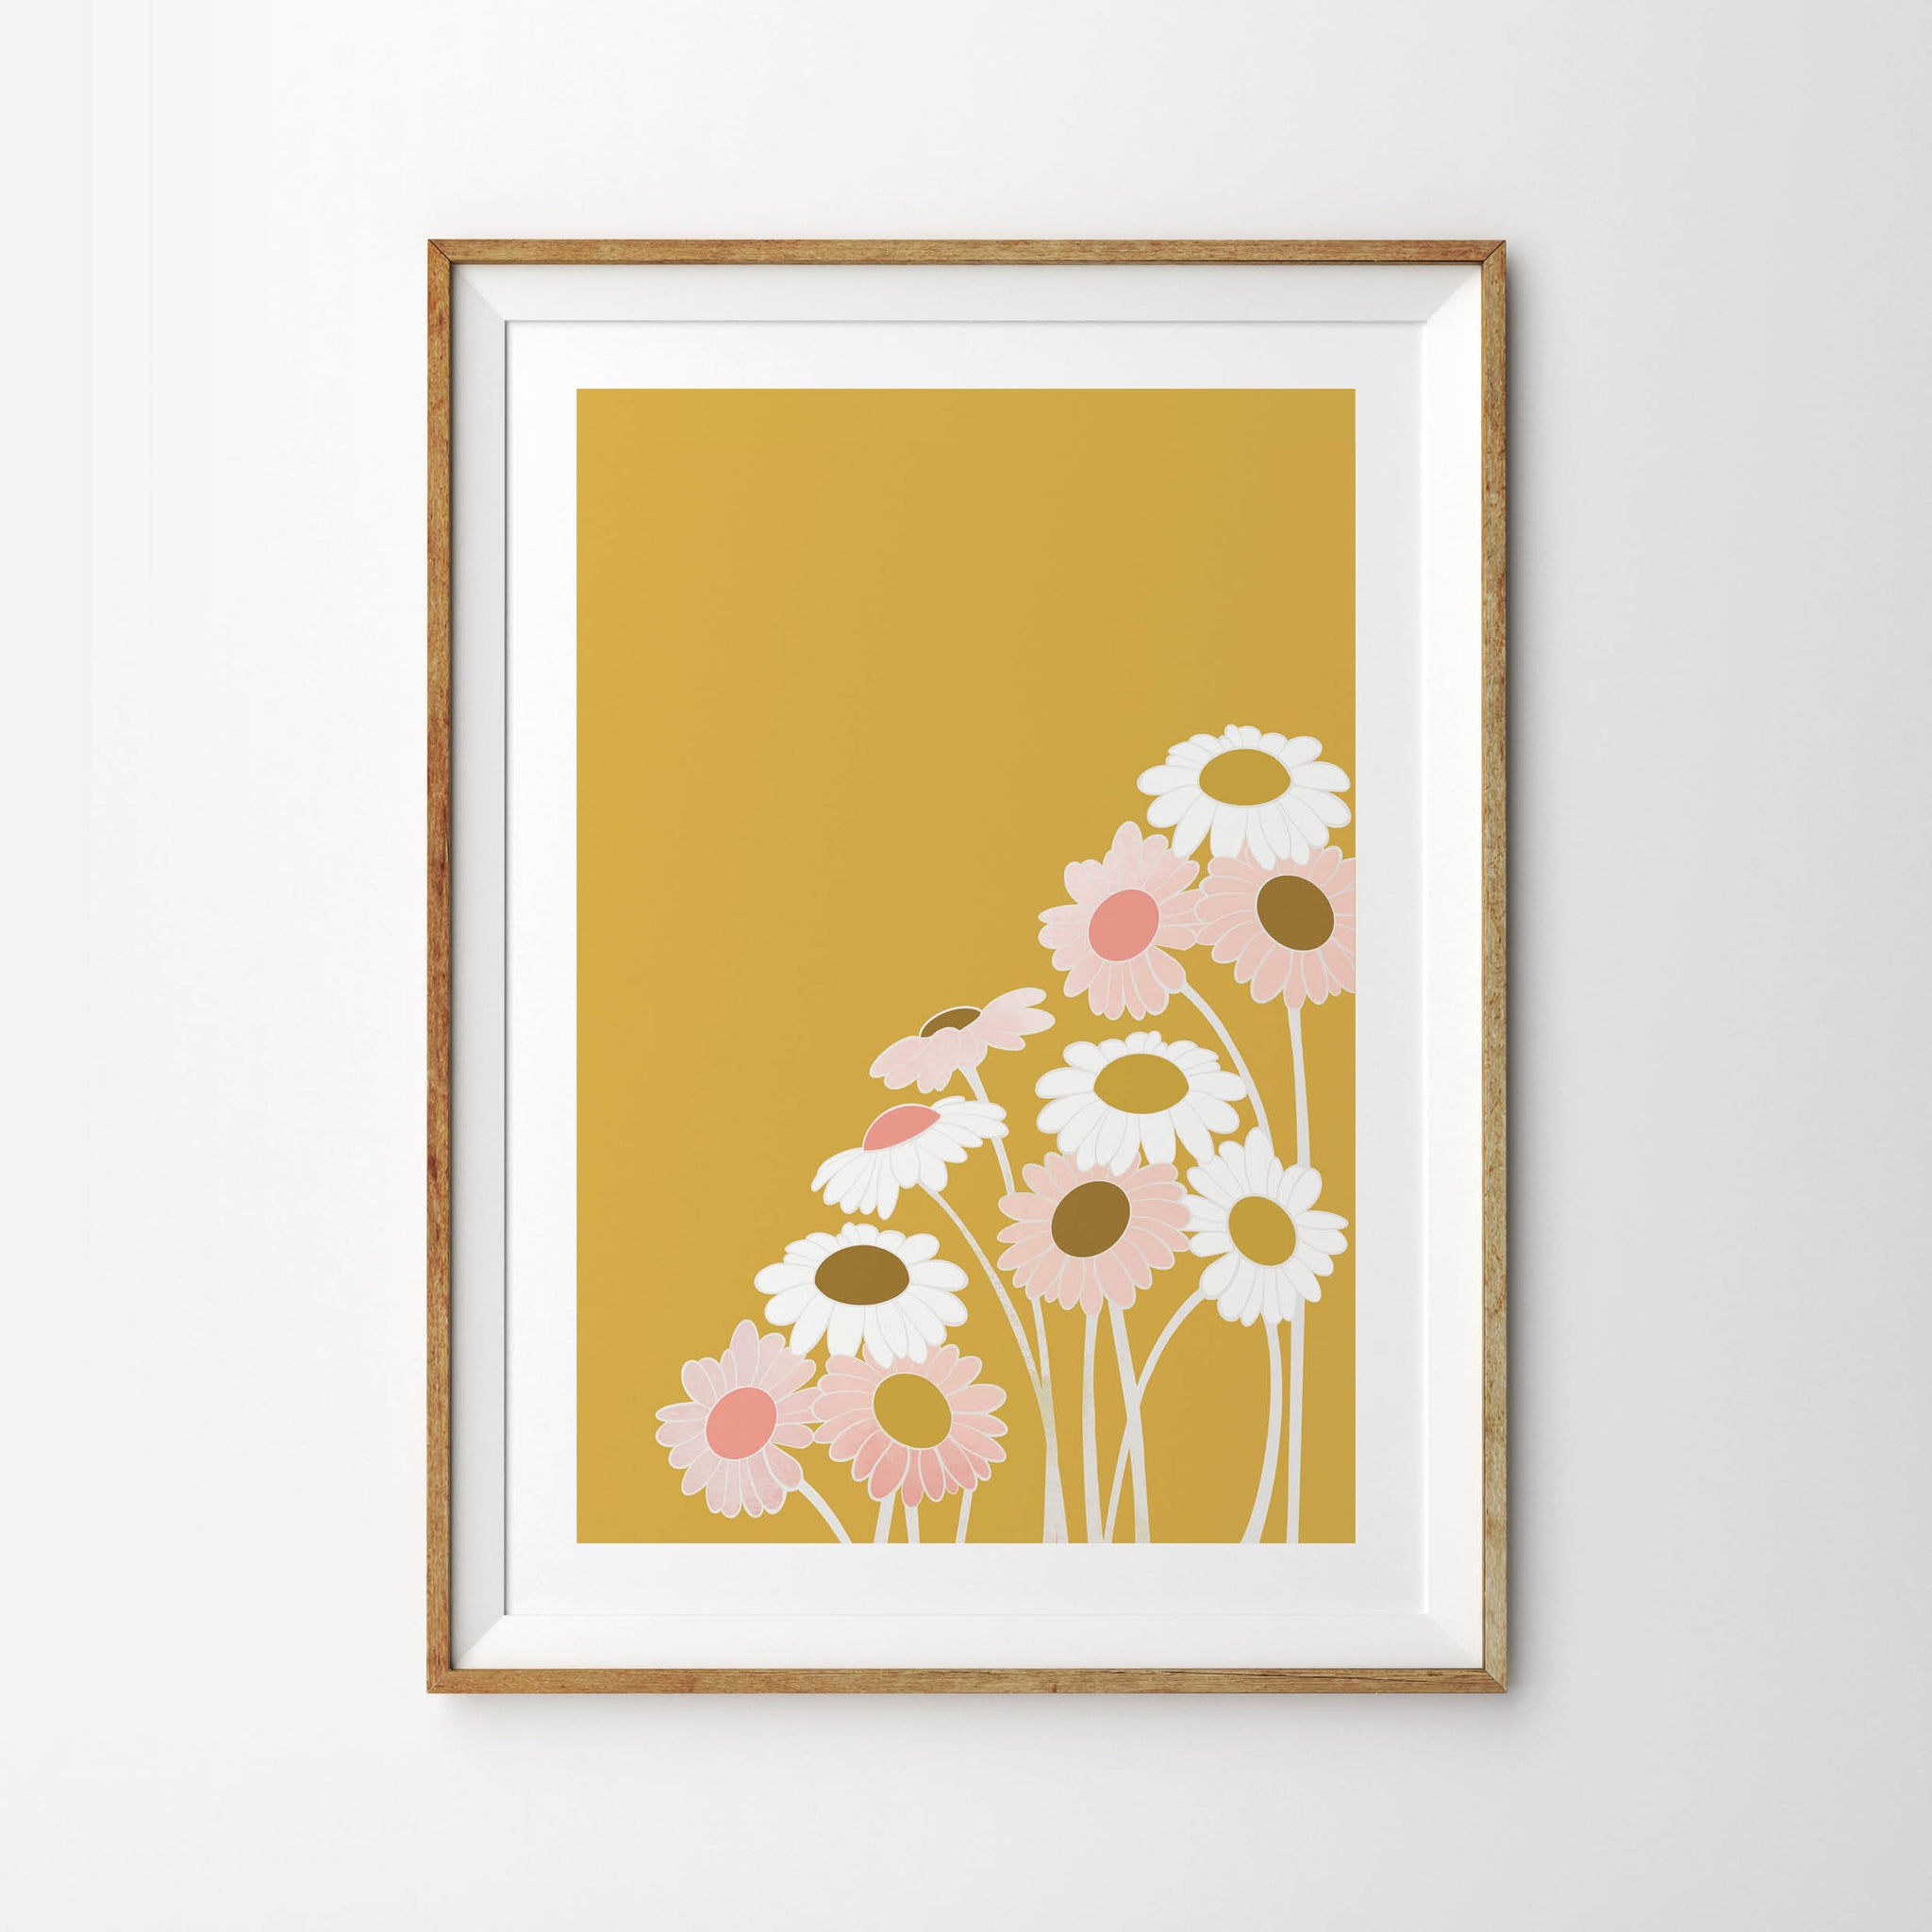 Pastel Pink and White Daisy Flowers with Mustard Wall - Tulip House Studio